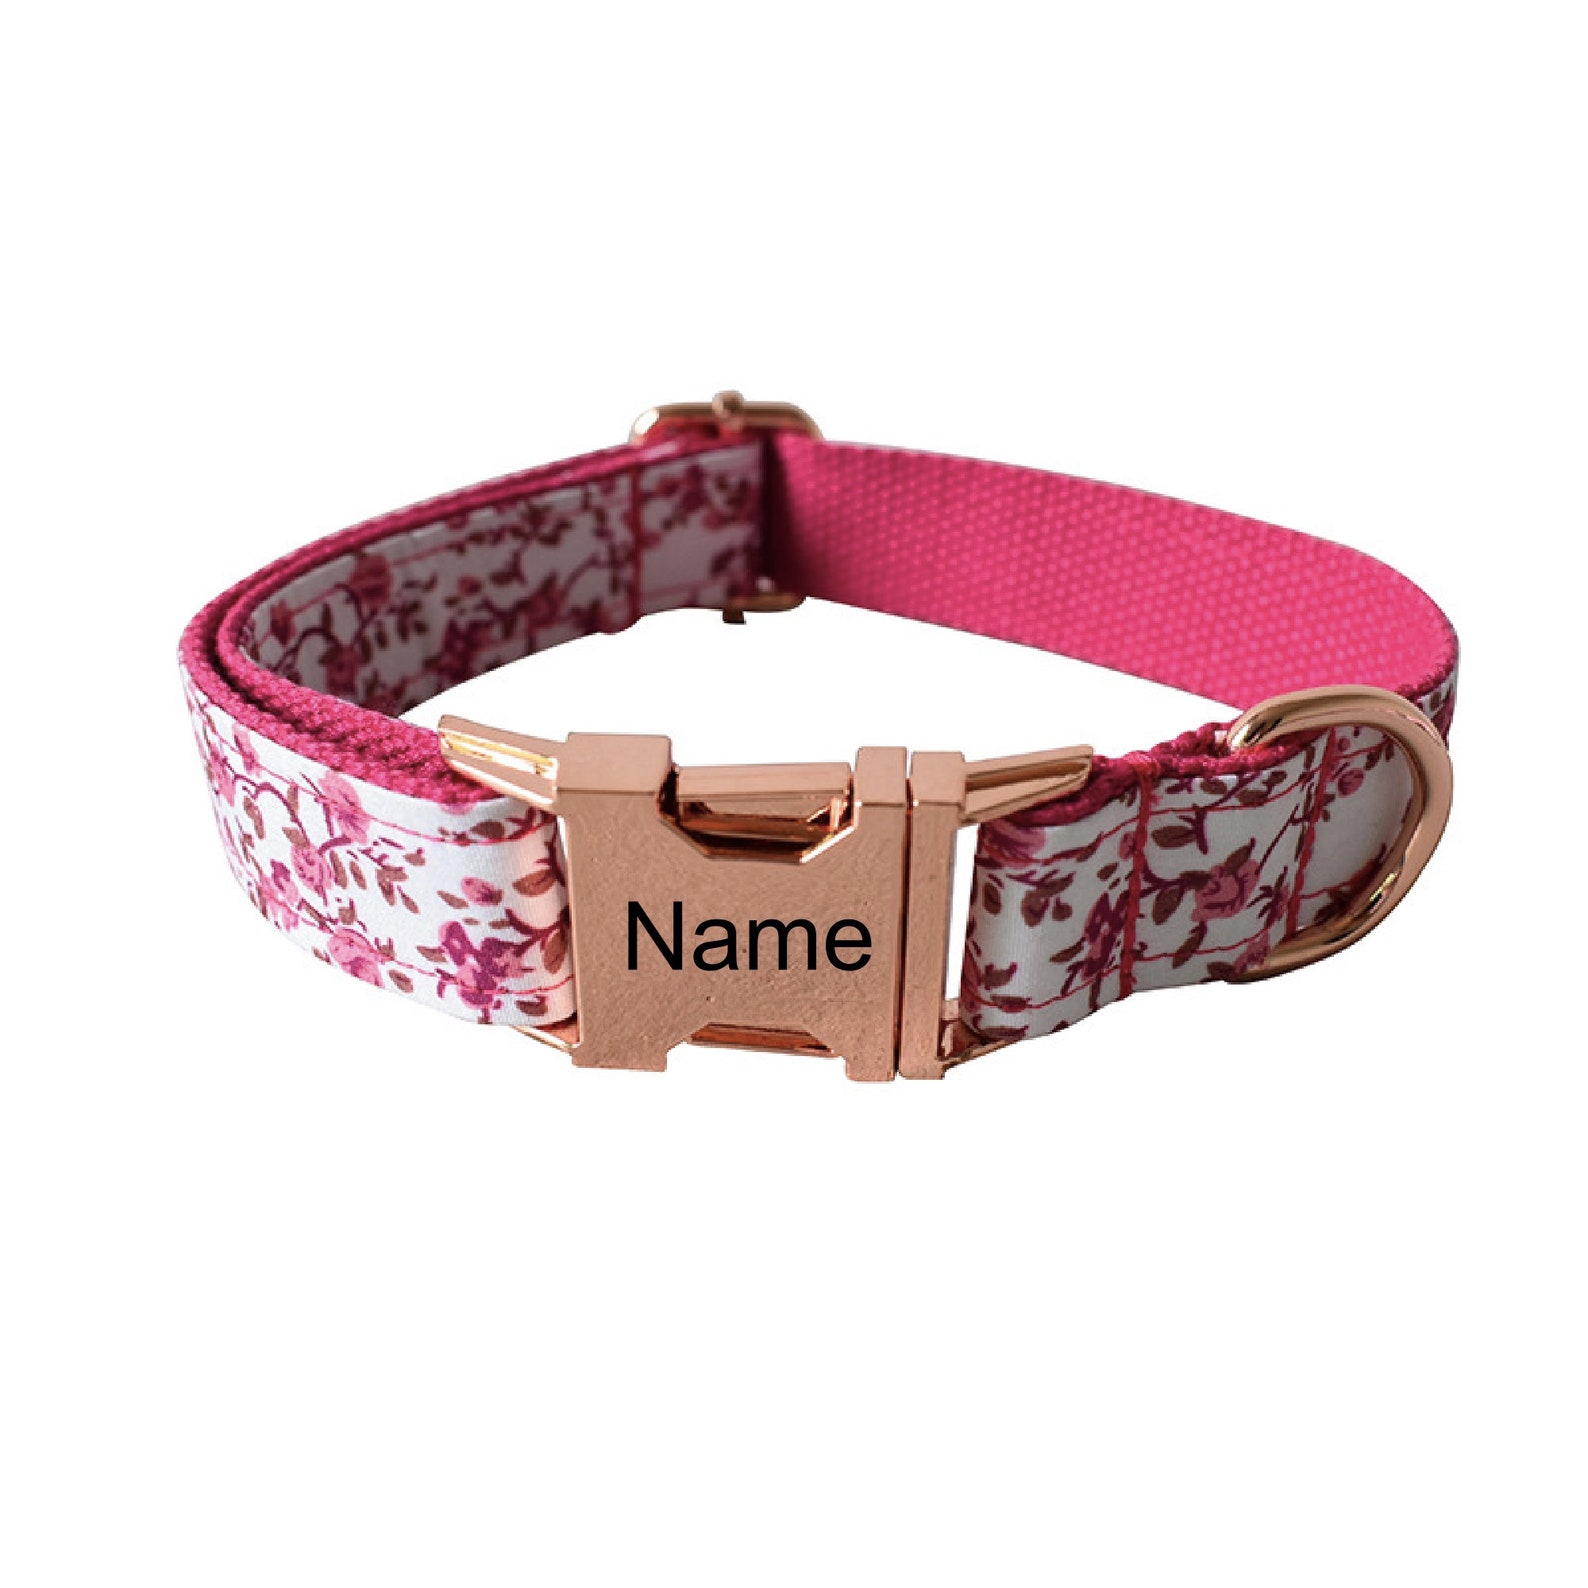 Name Personalized Dog Collars And Leashes Set In Hot Pink | Etsy